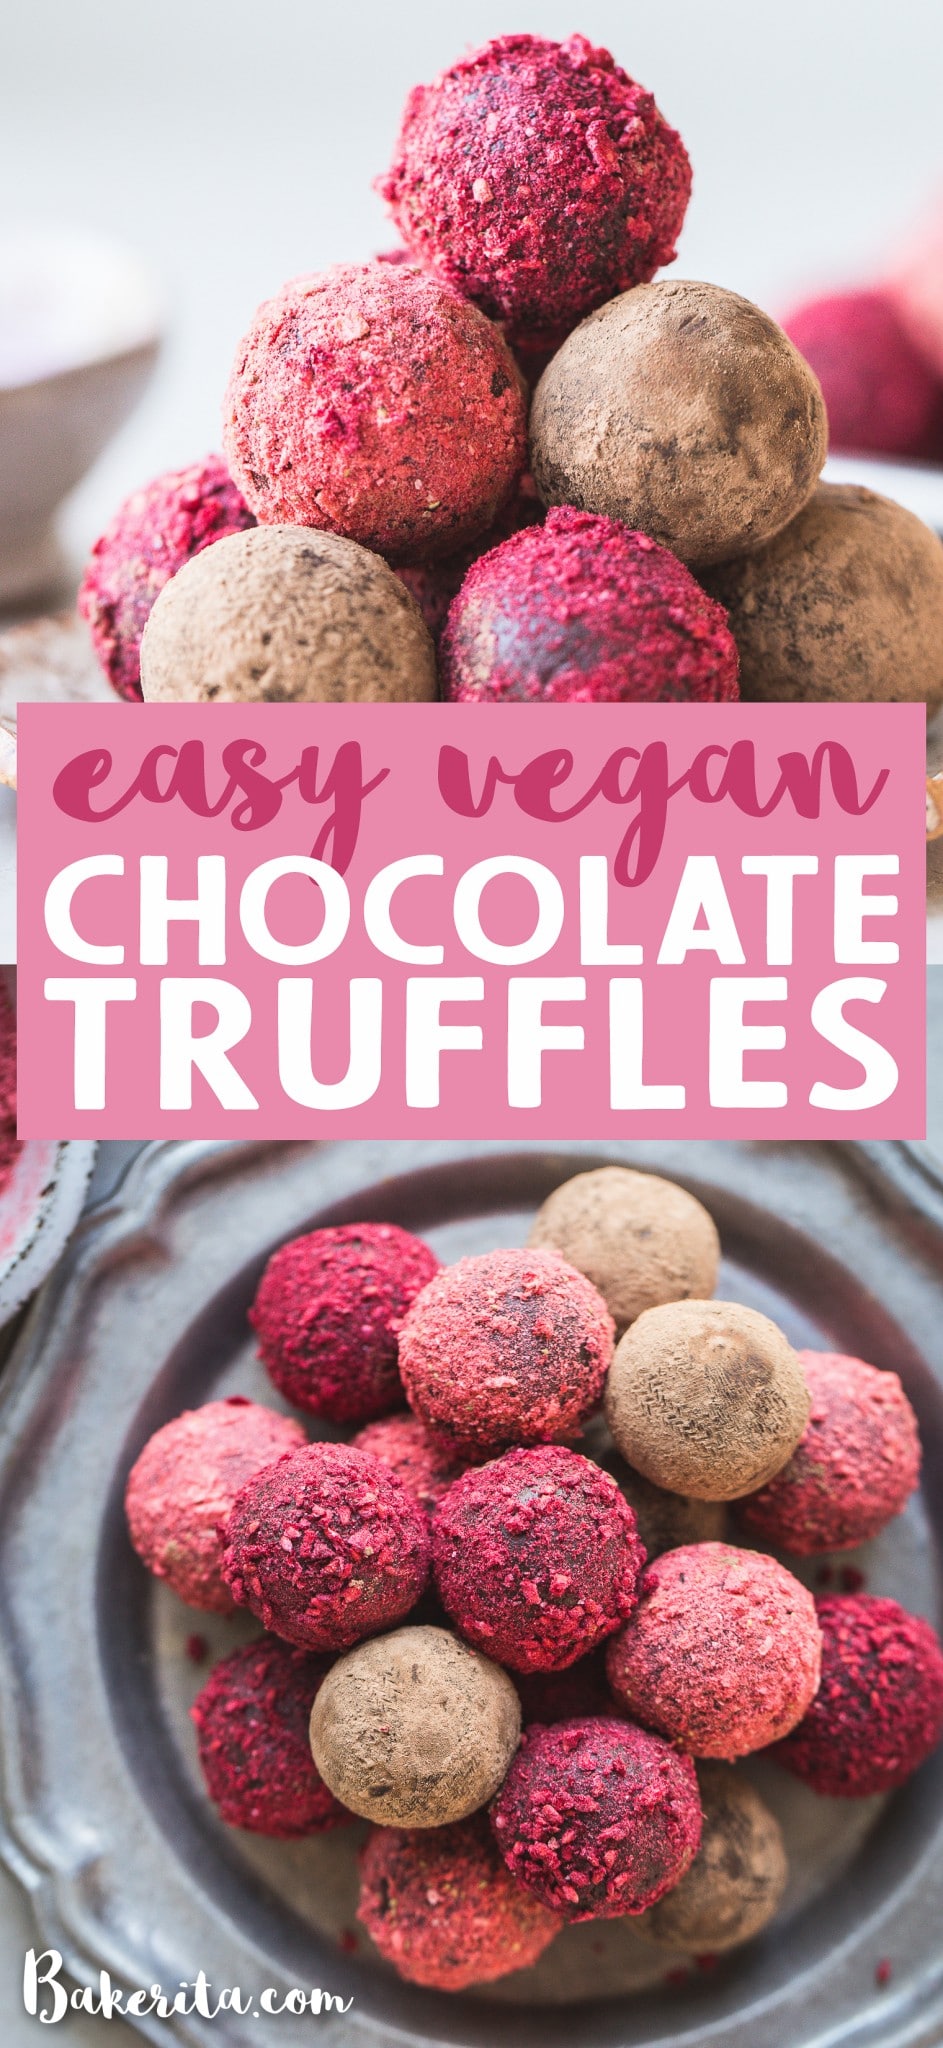 Easy Vegan Chocolate Truffles: made with only FOUR ingredients and they're paleo-friendly with a nut-free option! This simple truffle recipe is the perfect homemade holiday gift.